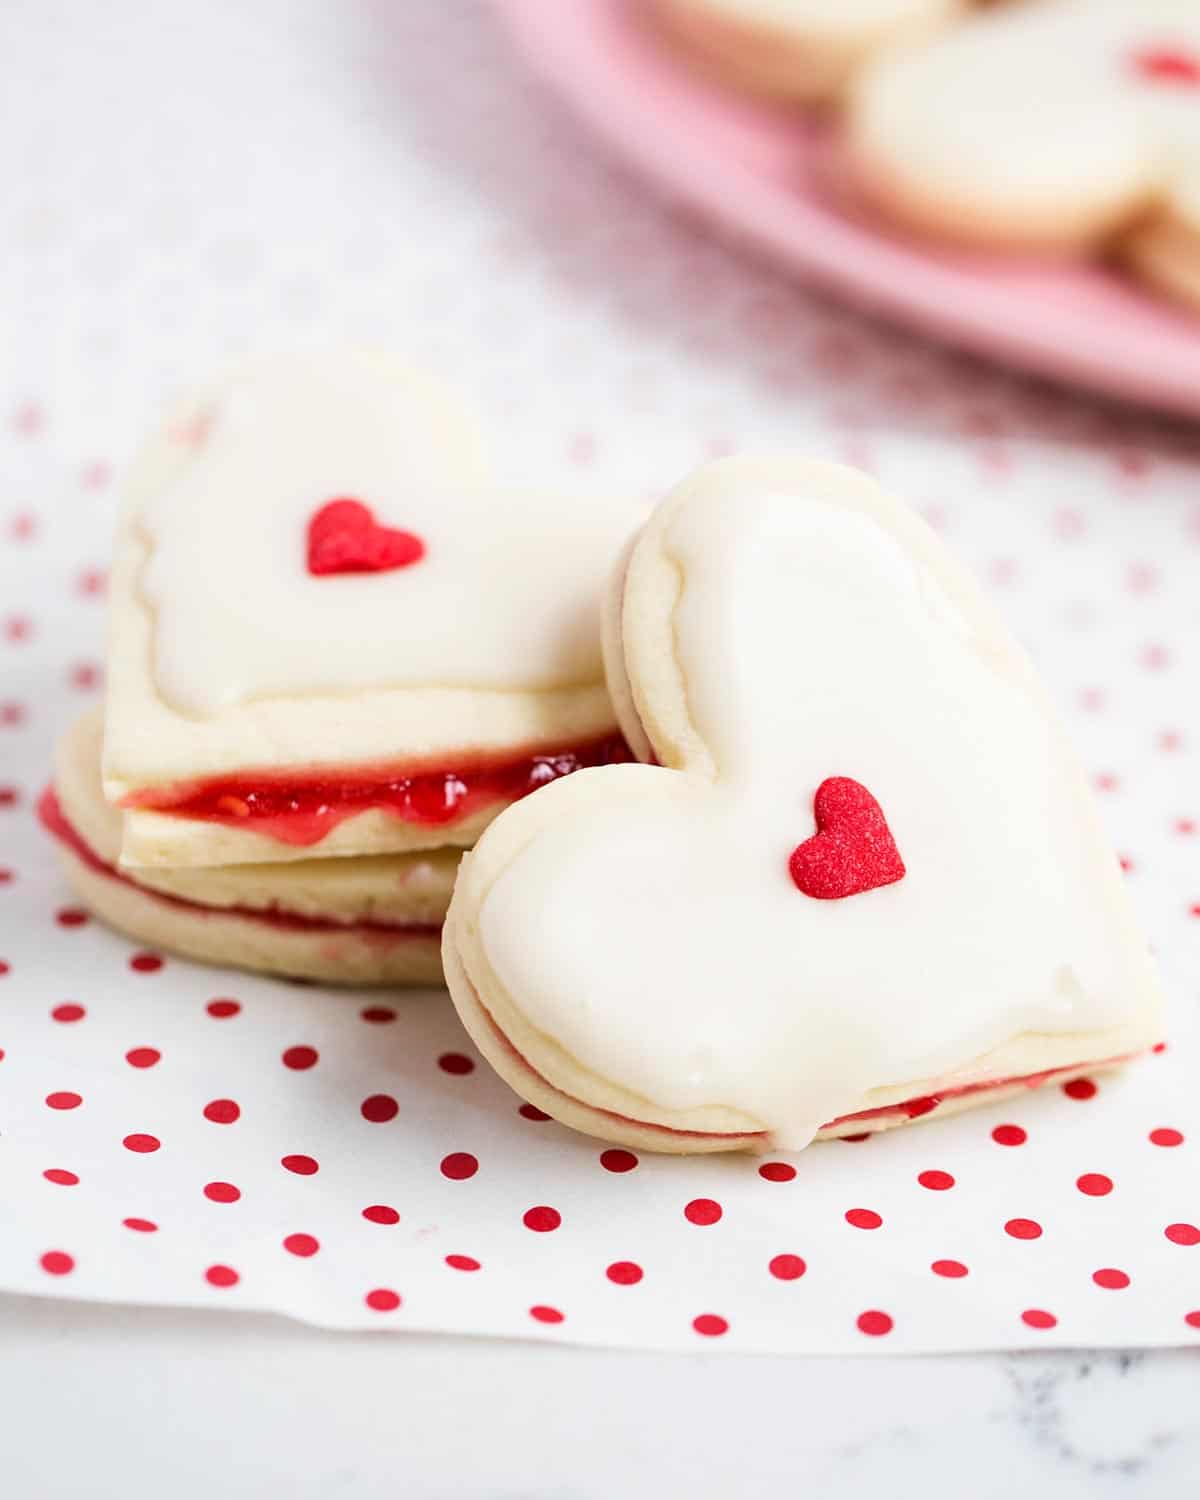 Heart shaped empire biscuits.